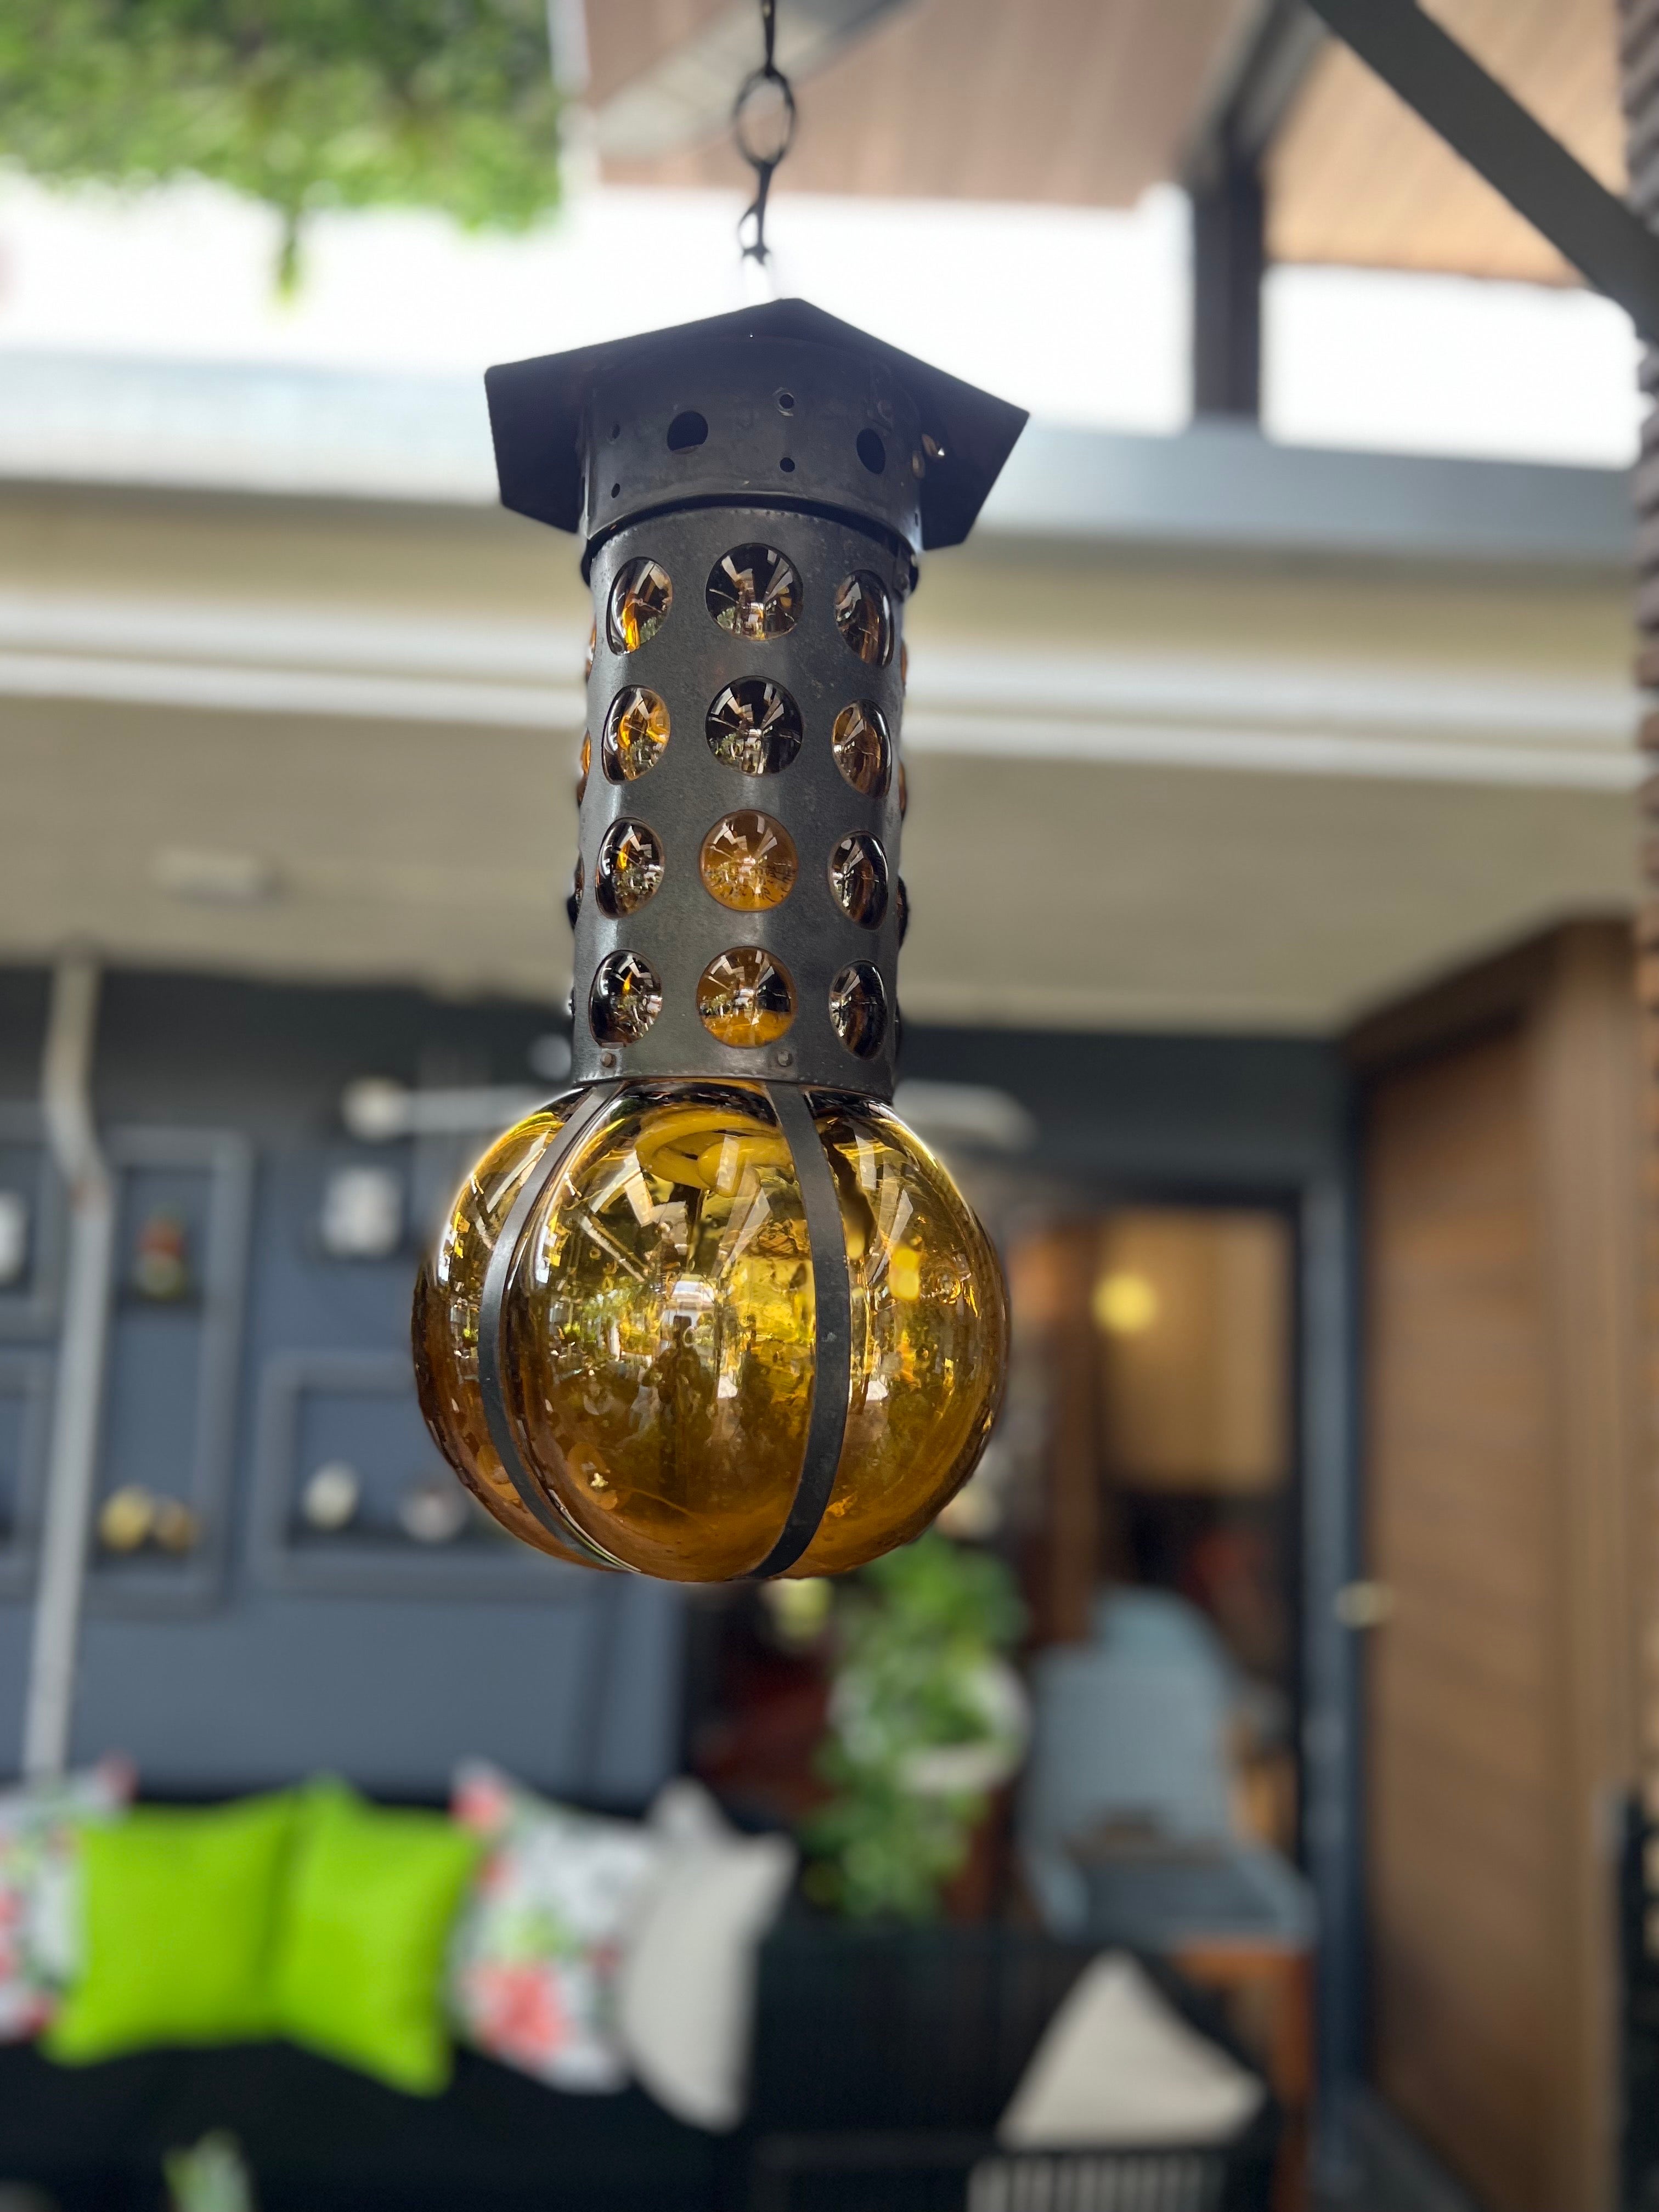 Blown glass manufactured by Feders and designed by Felipe Derflingher in amber color, Derflingher of this style made more glasses and bottles than lamps, that is why this type of pieces is no longer found on the market. The wire is the original, it